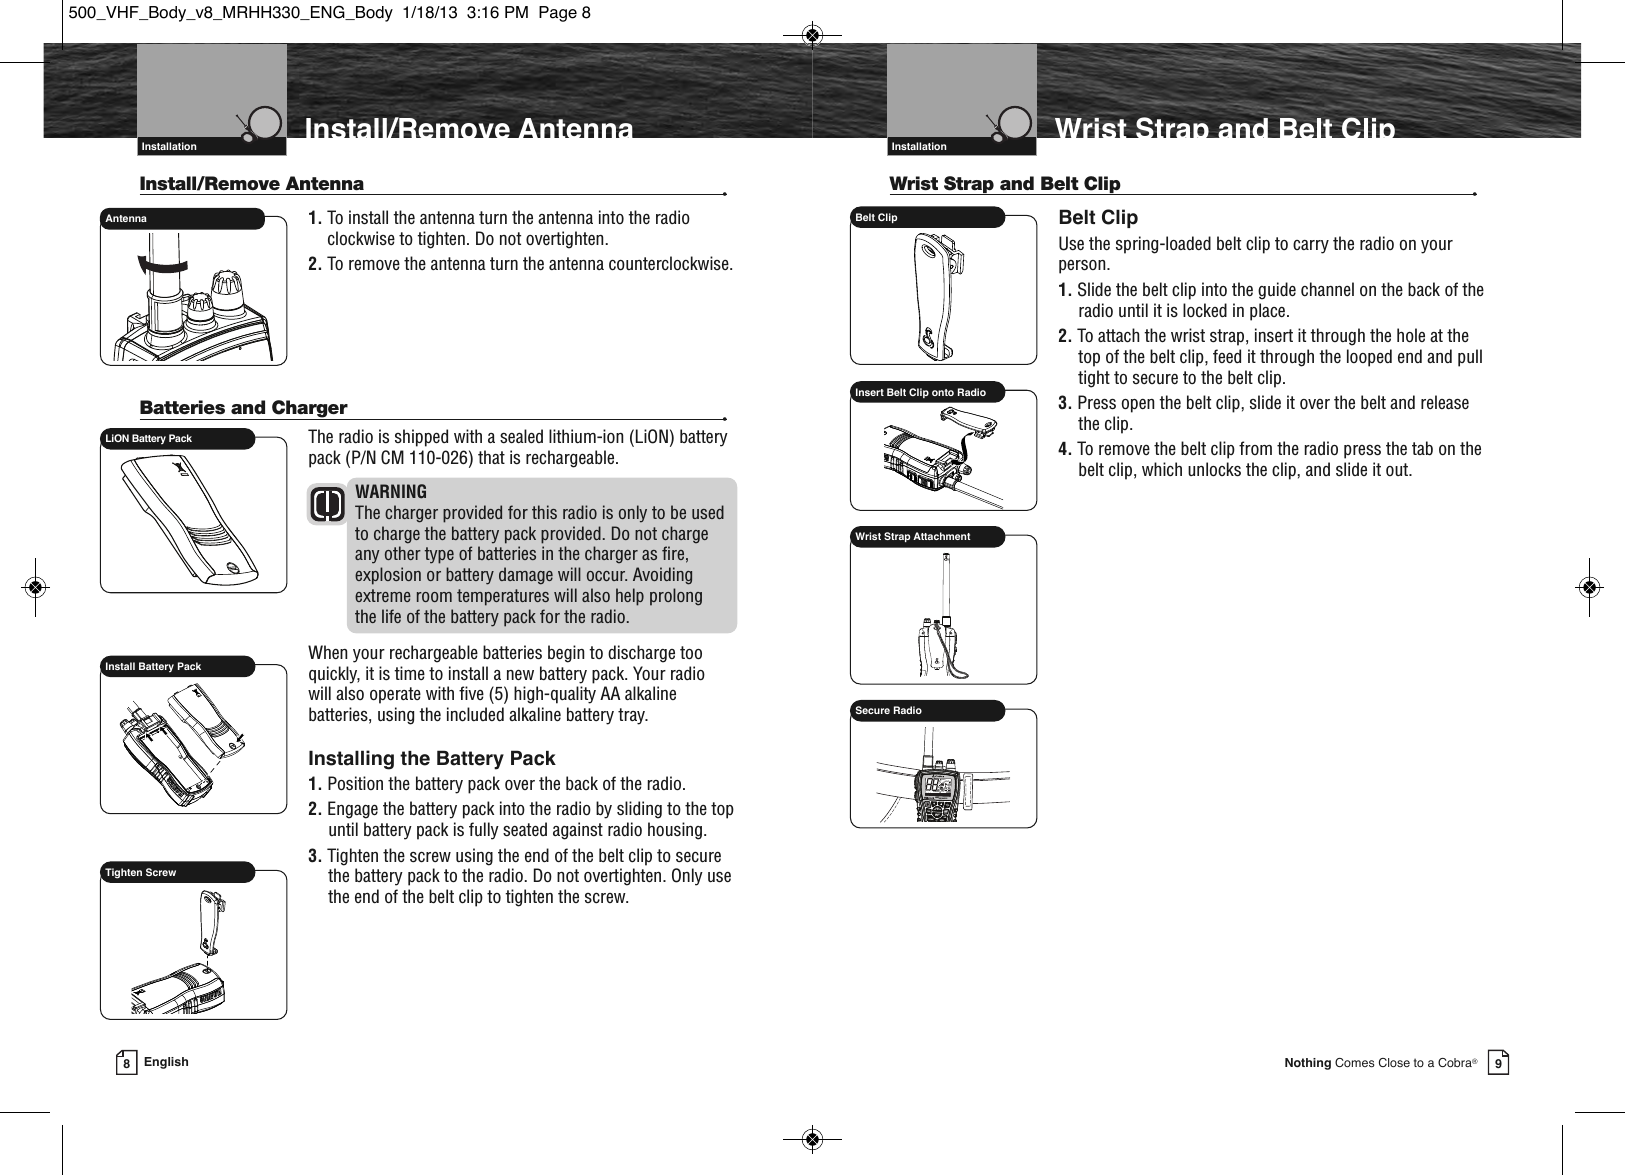 Page 7 of Cobra Electronics MRHH500 BT ACCESSORY IN MARINE RADIO User Manual MRHH330 ENG Body